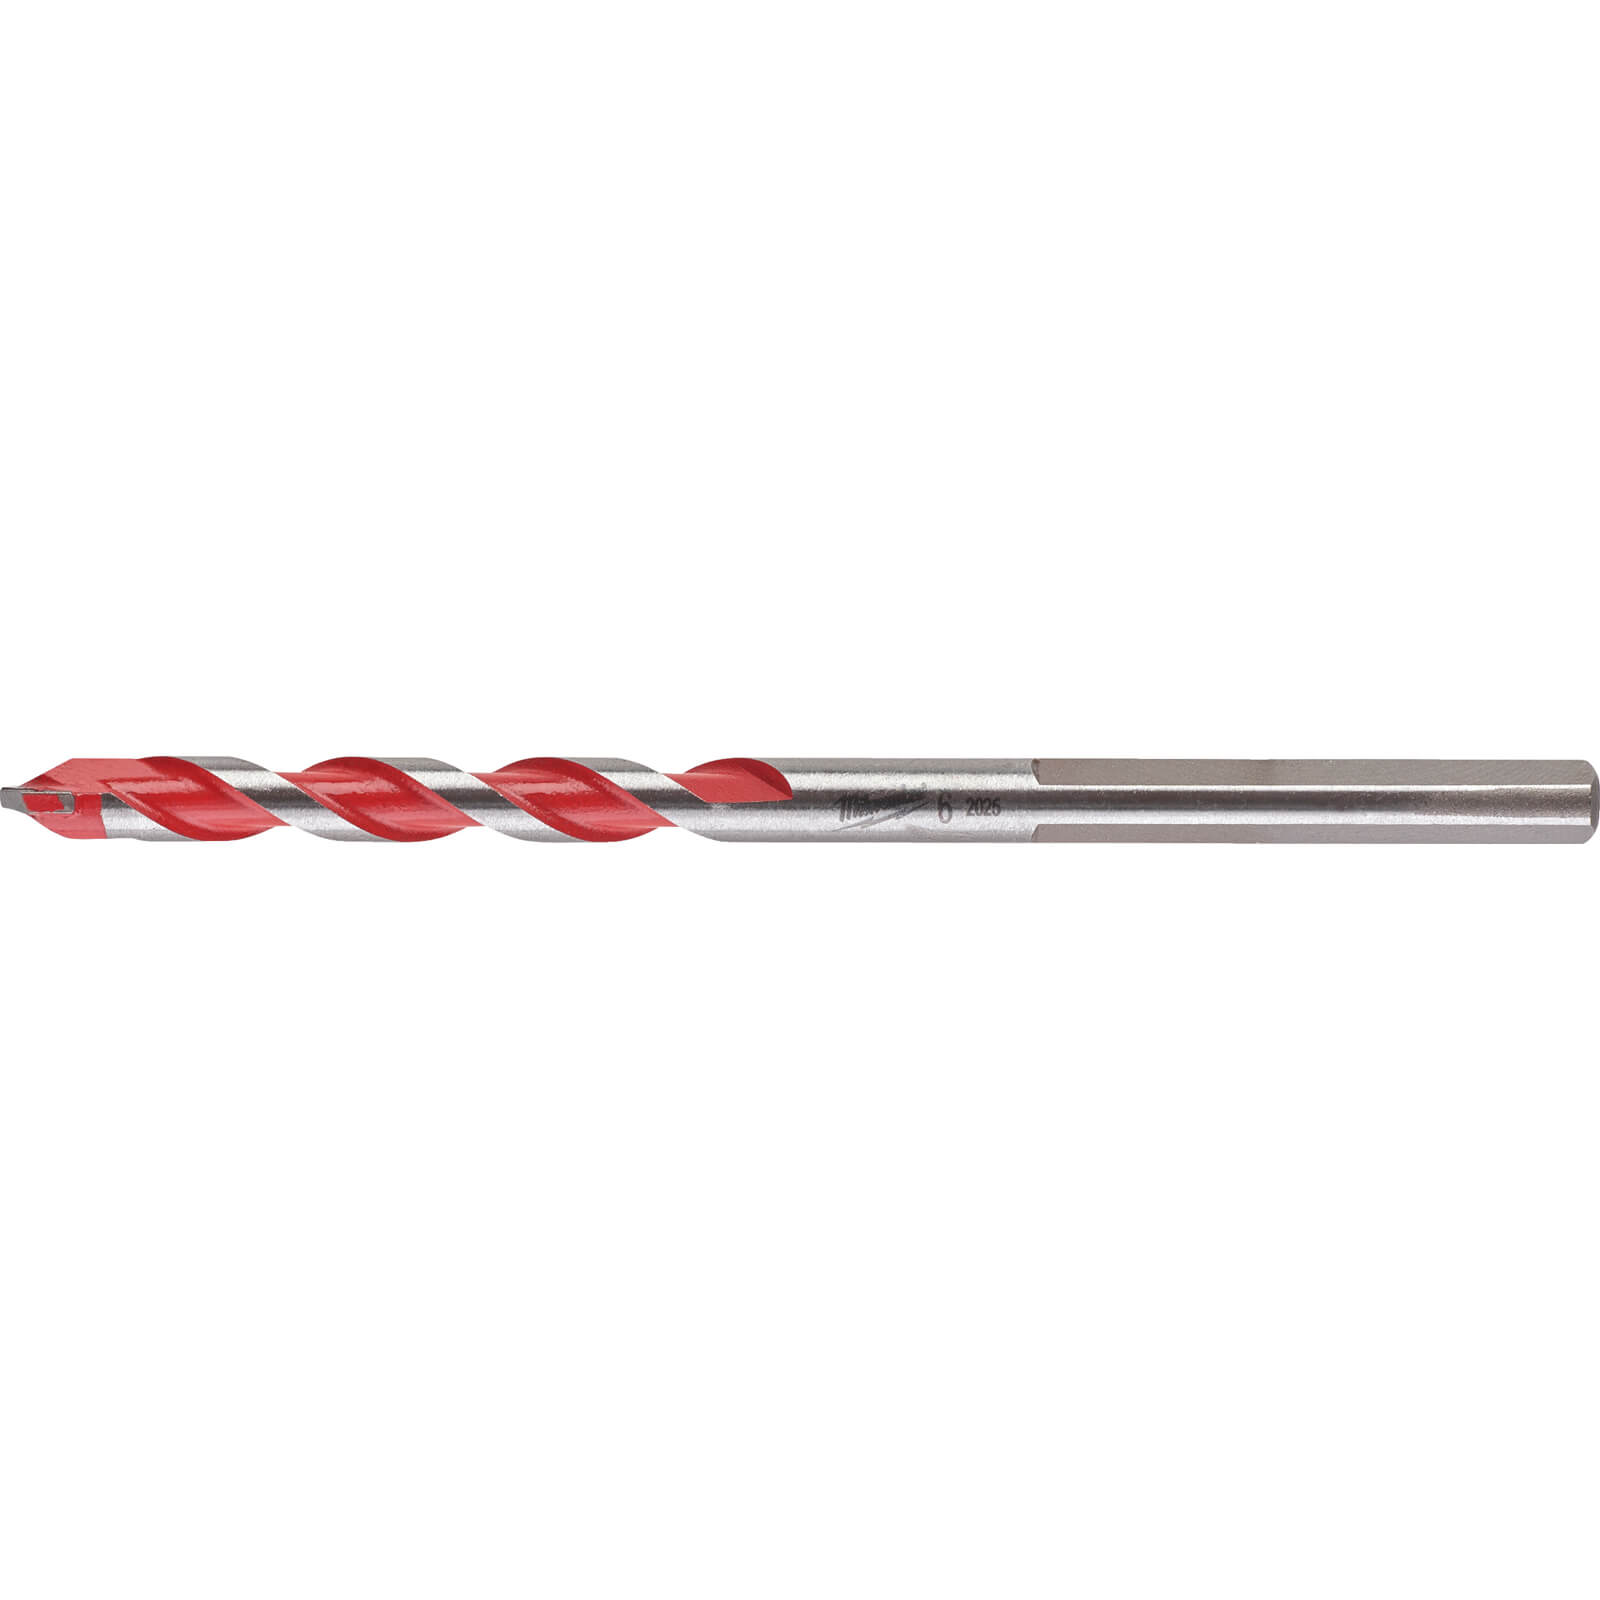 Image of Milwaukee Premium Concrete Drill 6mm 100mm Pack of 1